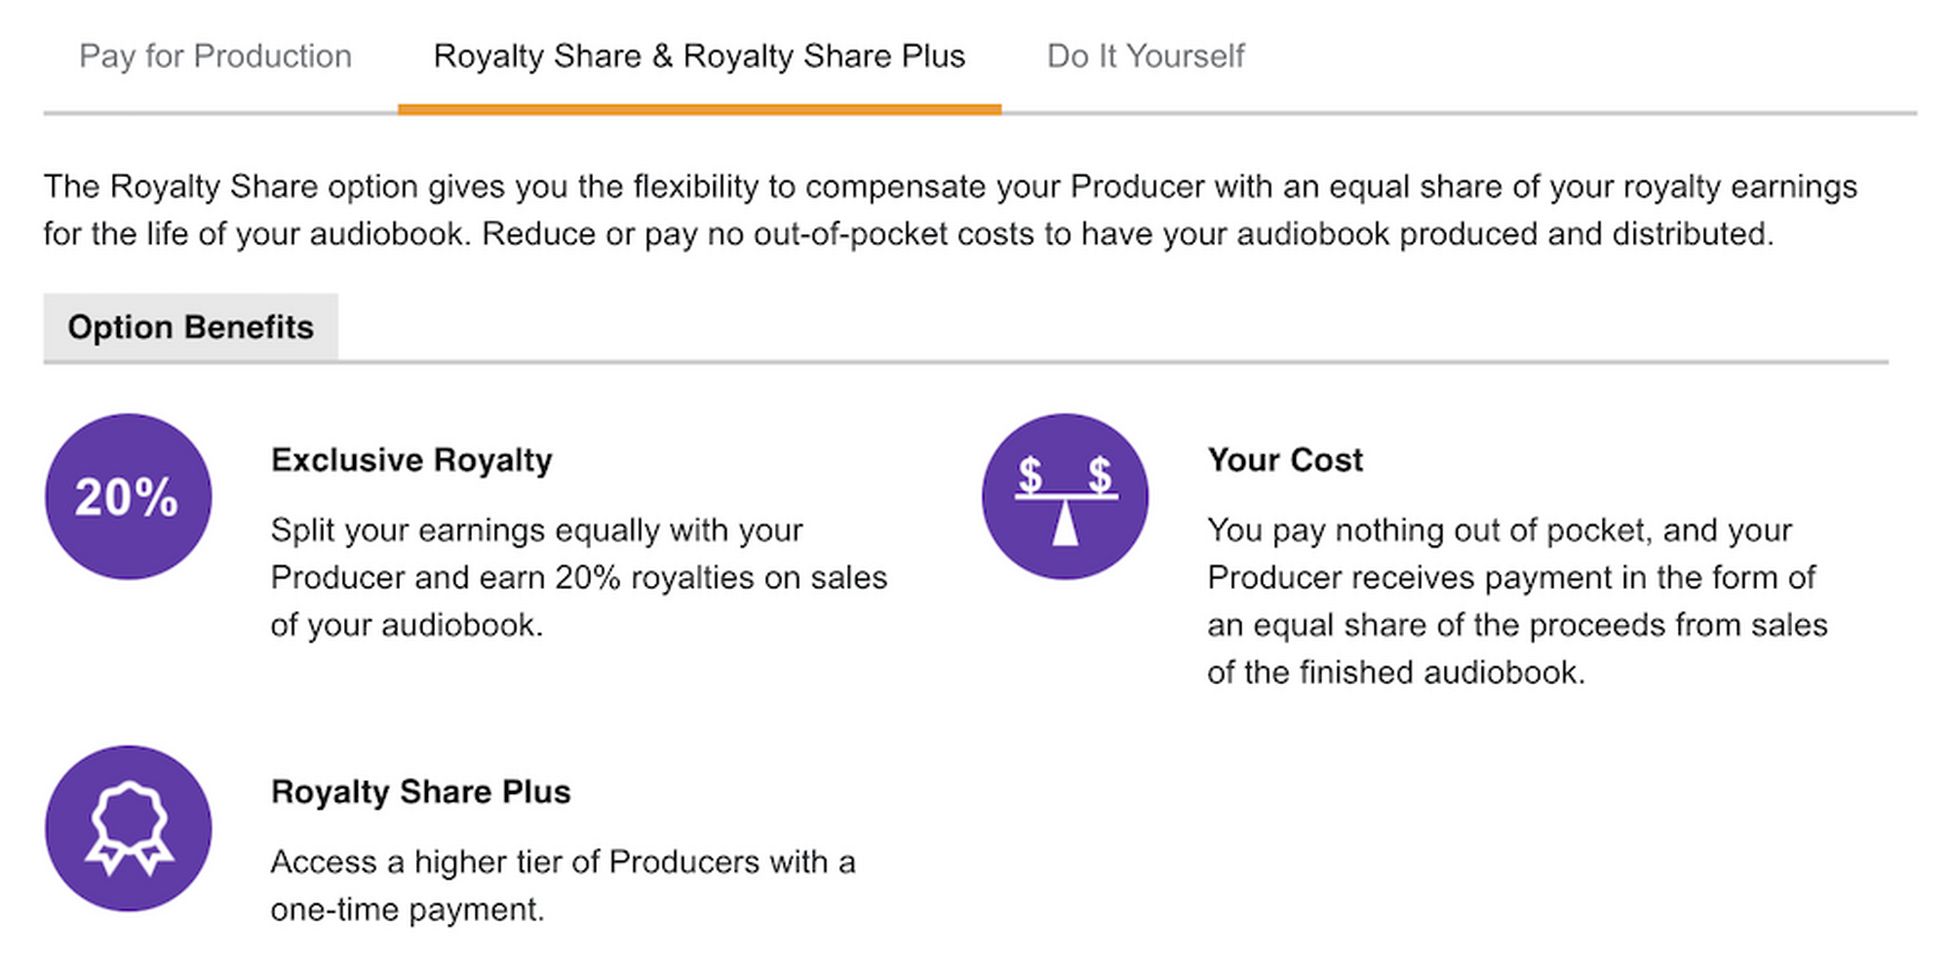 ACX Royalty Share & Royalty Share Plus